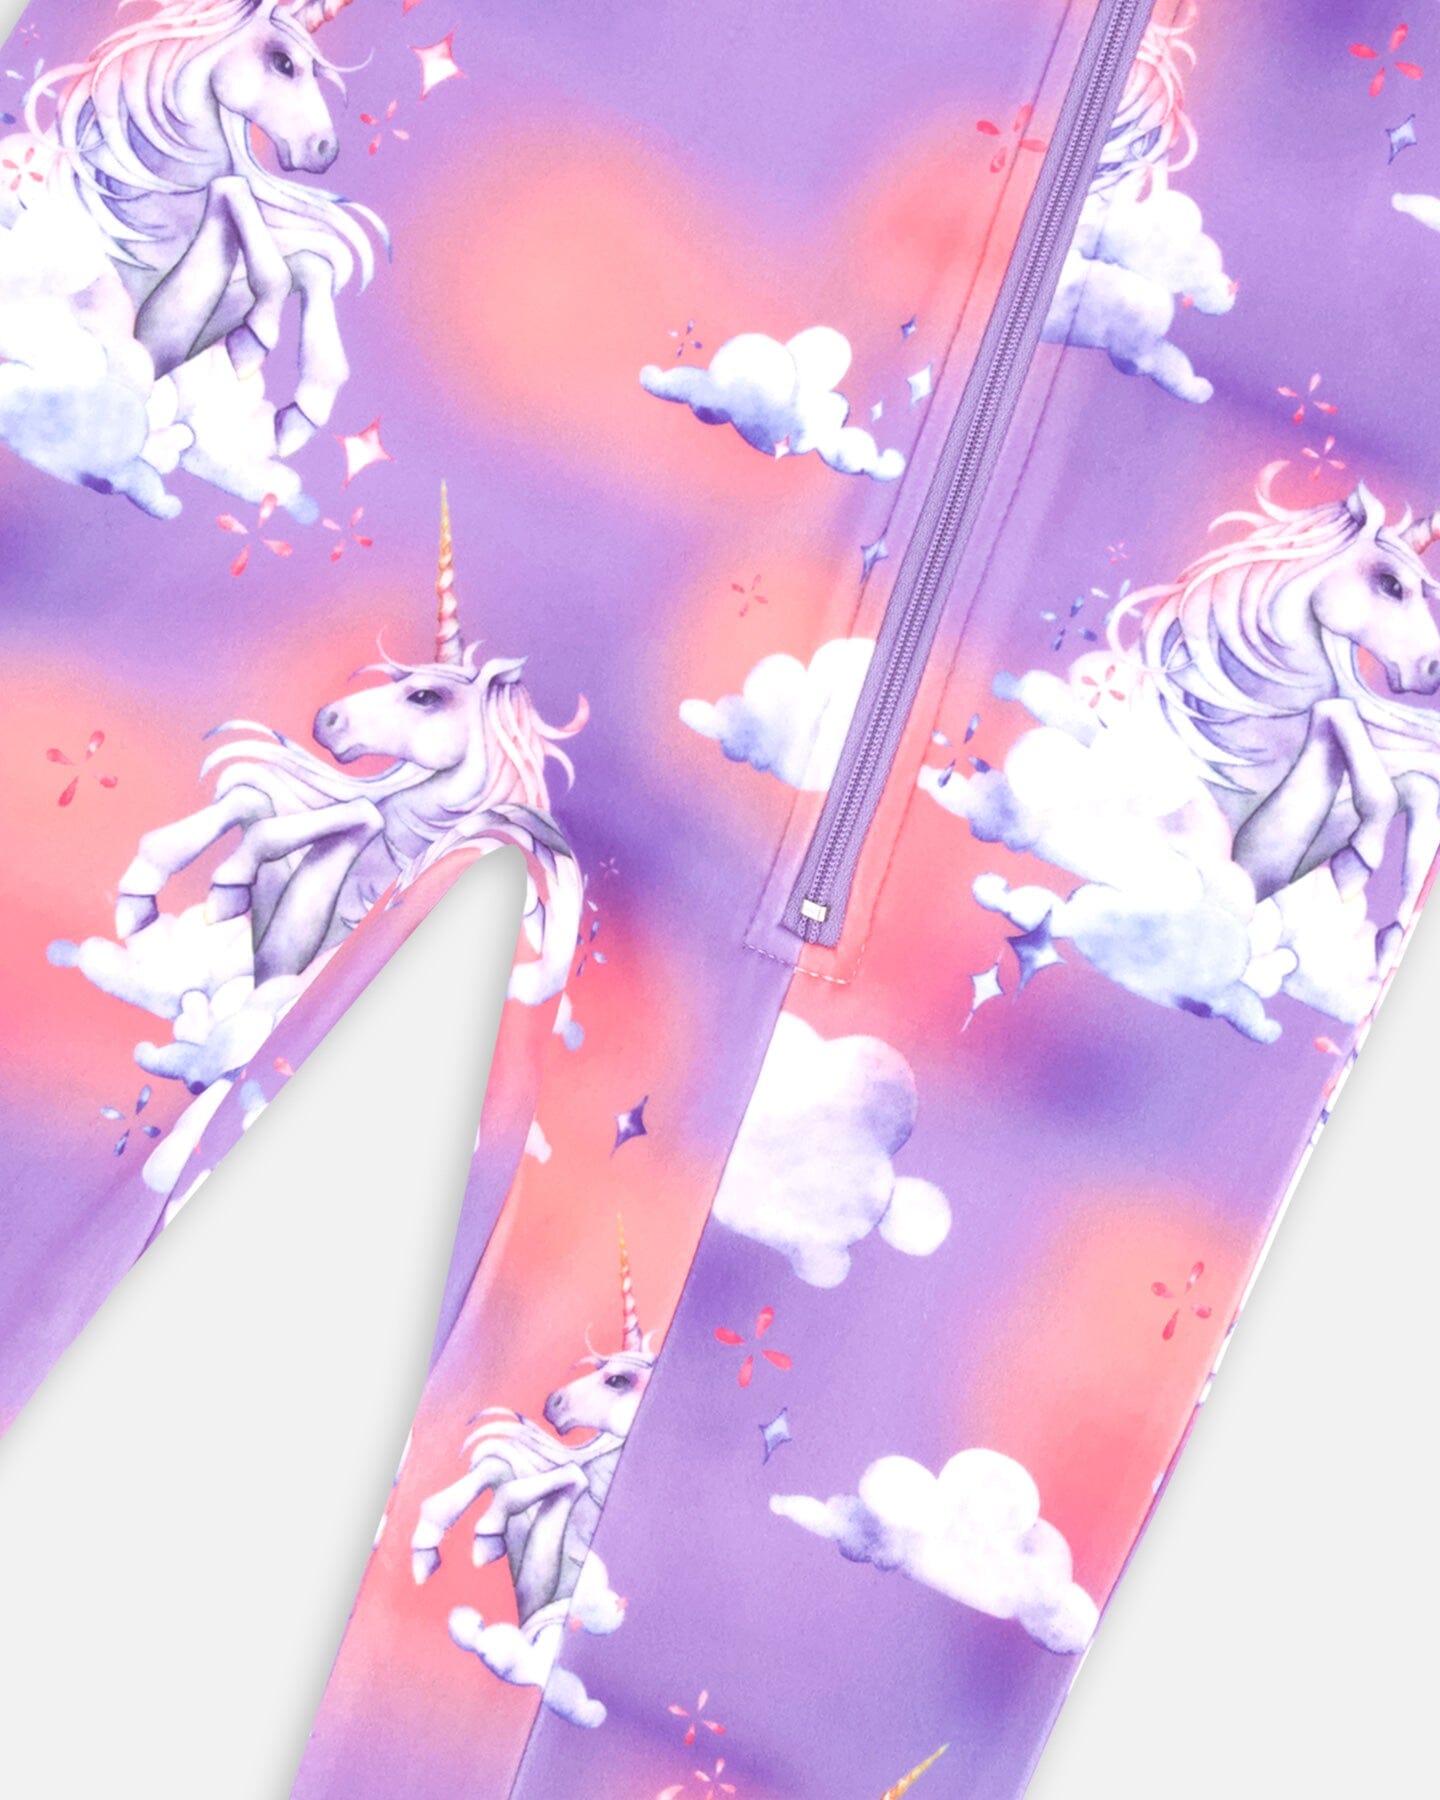 One Piece Thermal Underwear Set Lavender With Unicorns In The Clouds Print